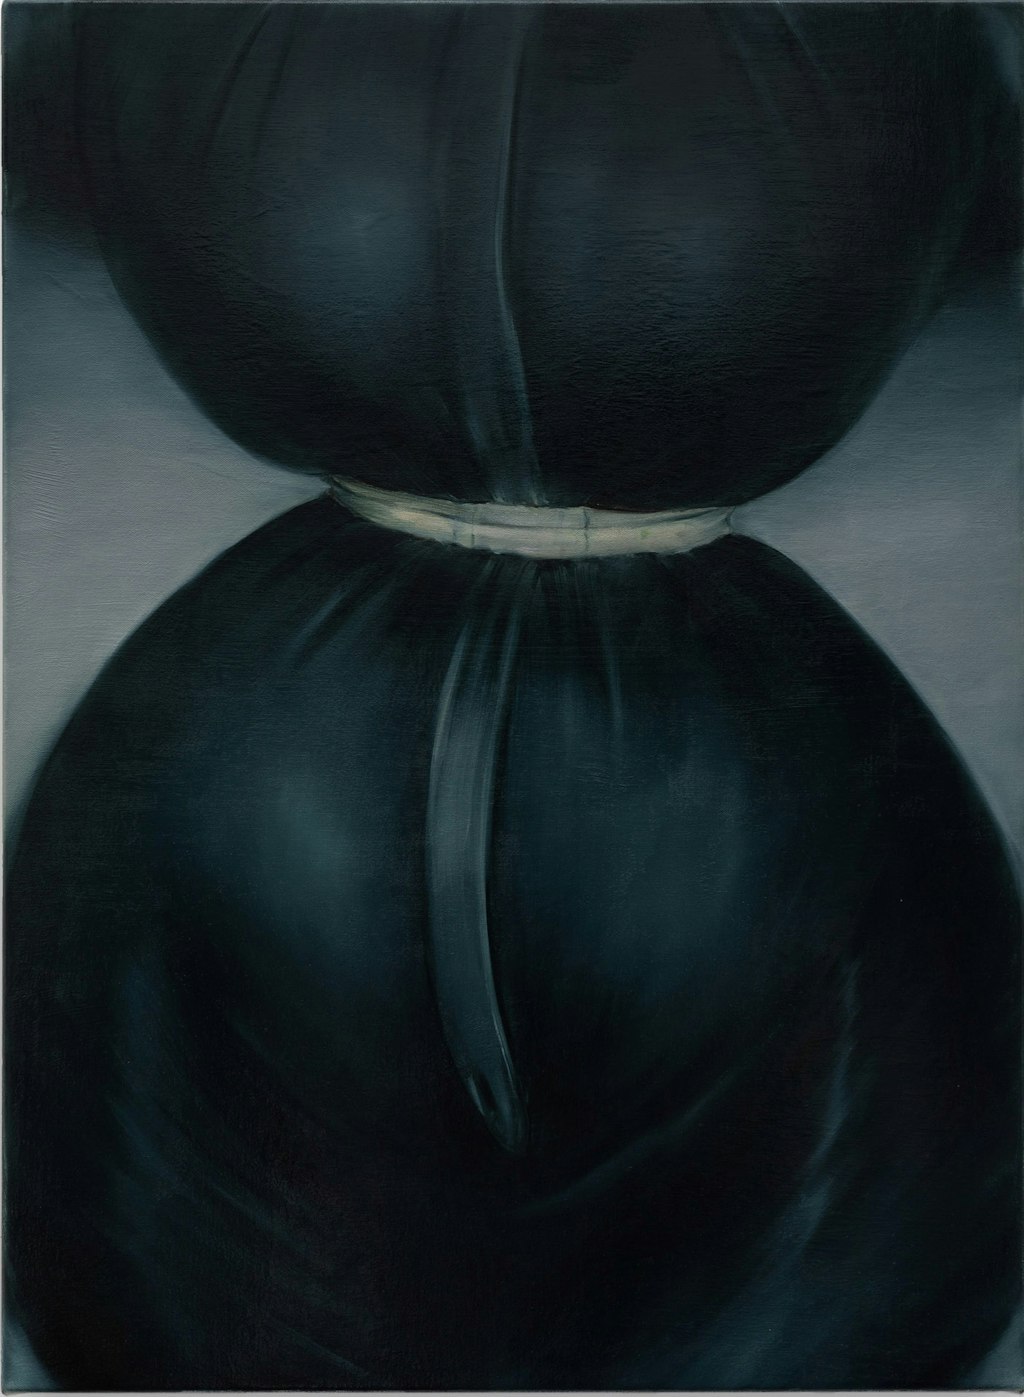 A voluptuous black-clad torso with a waist cinched by a thin white belt